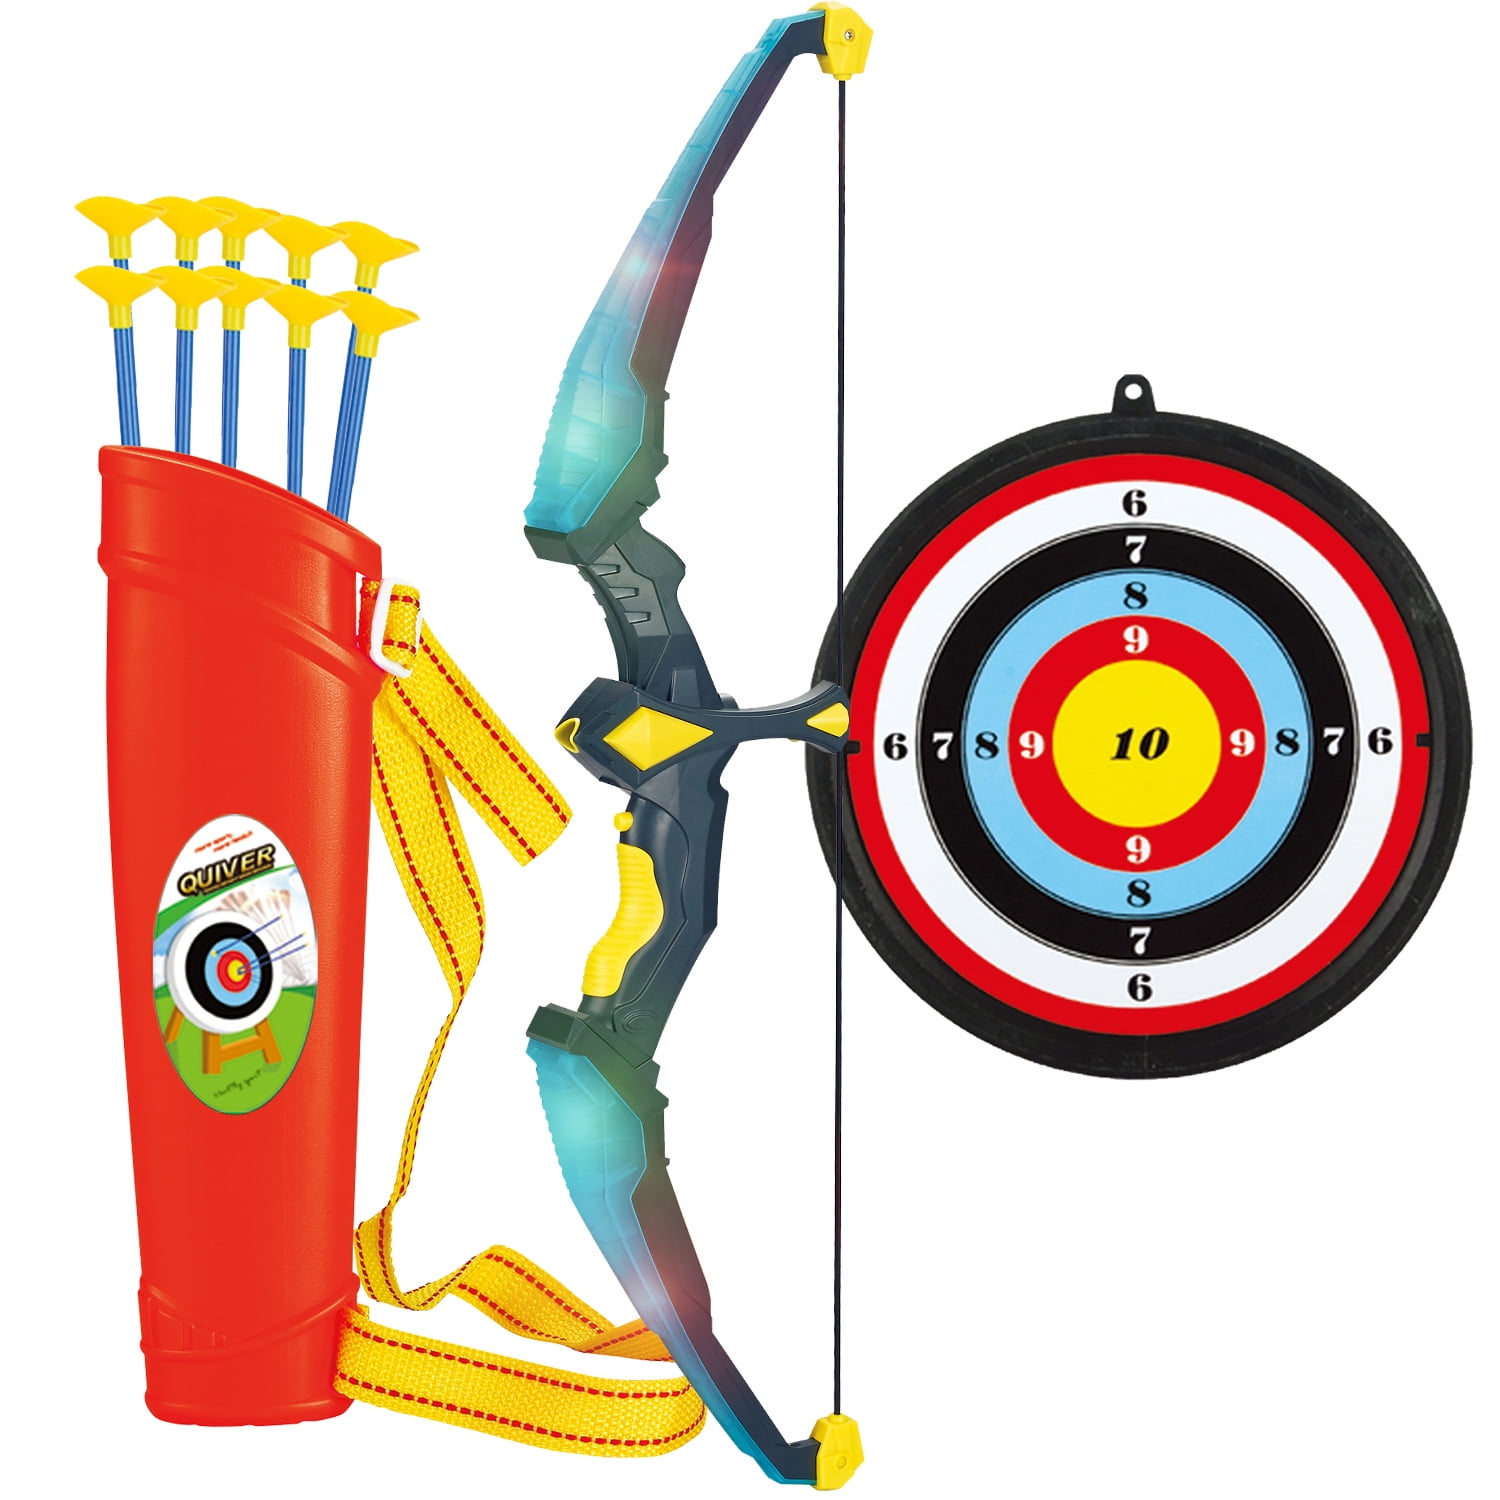 Light up Bow & Arrow Archery Set Outdoor Hunting Play With 3 Suction Target for sale online 